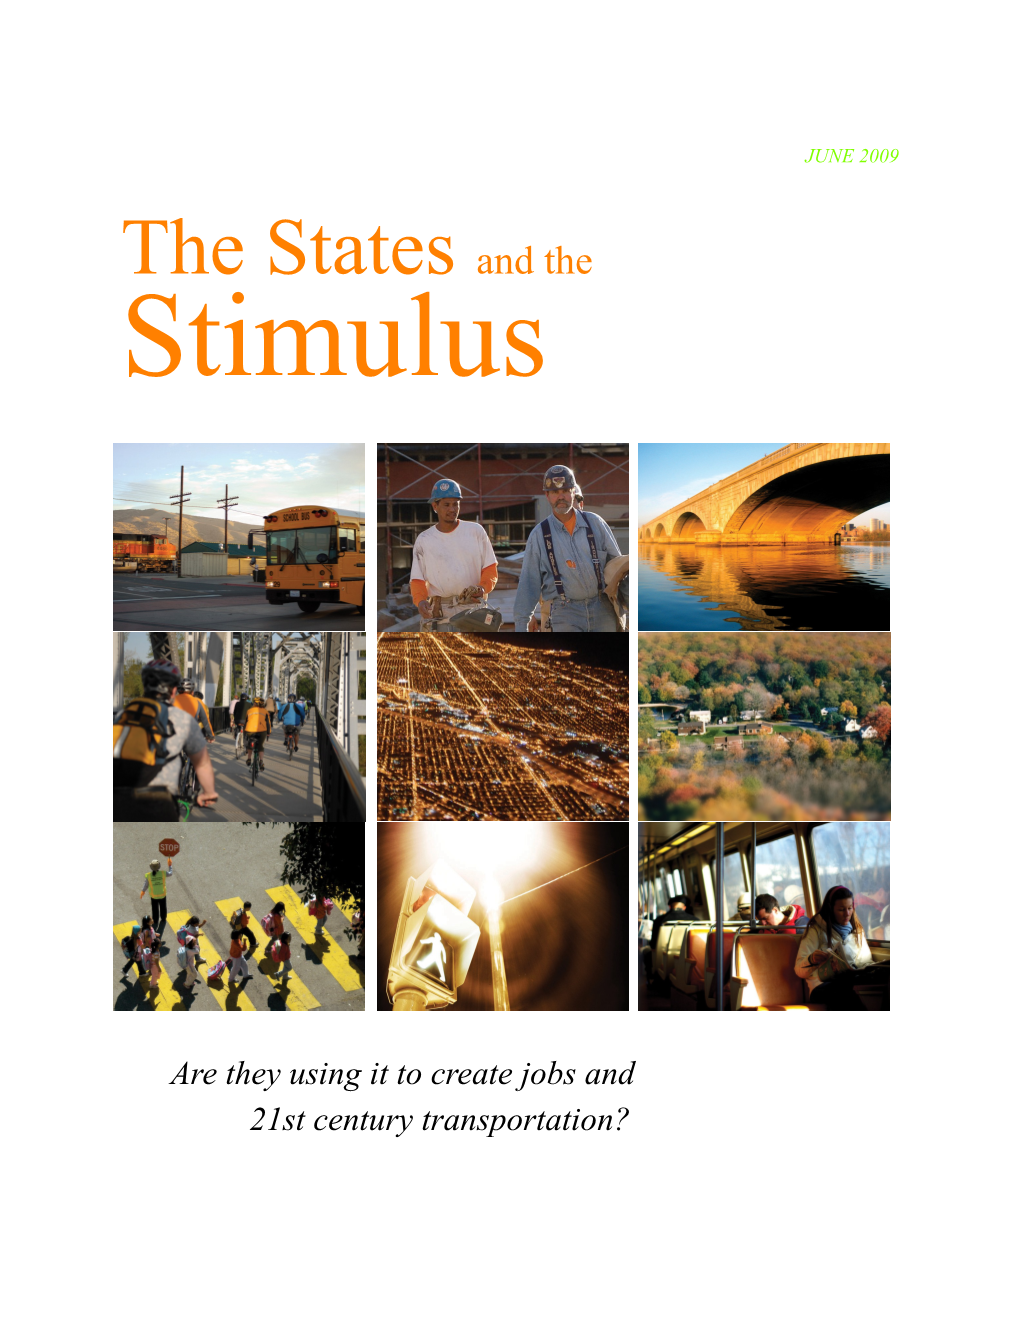 The States and the Stimulus